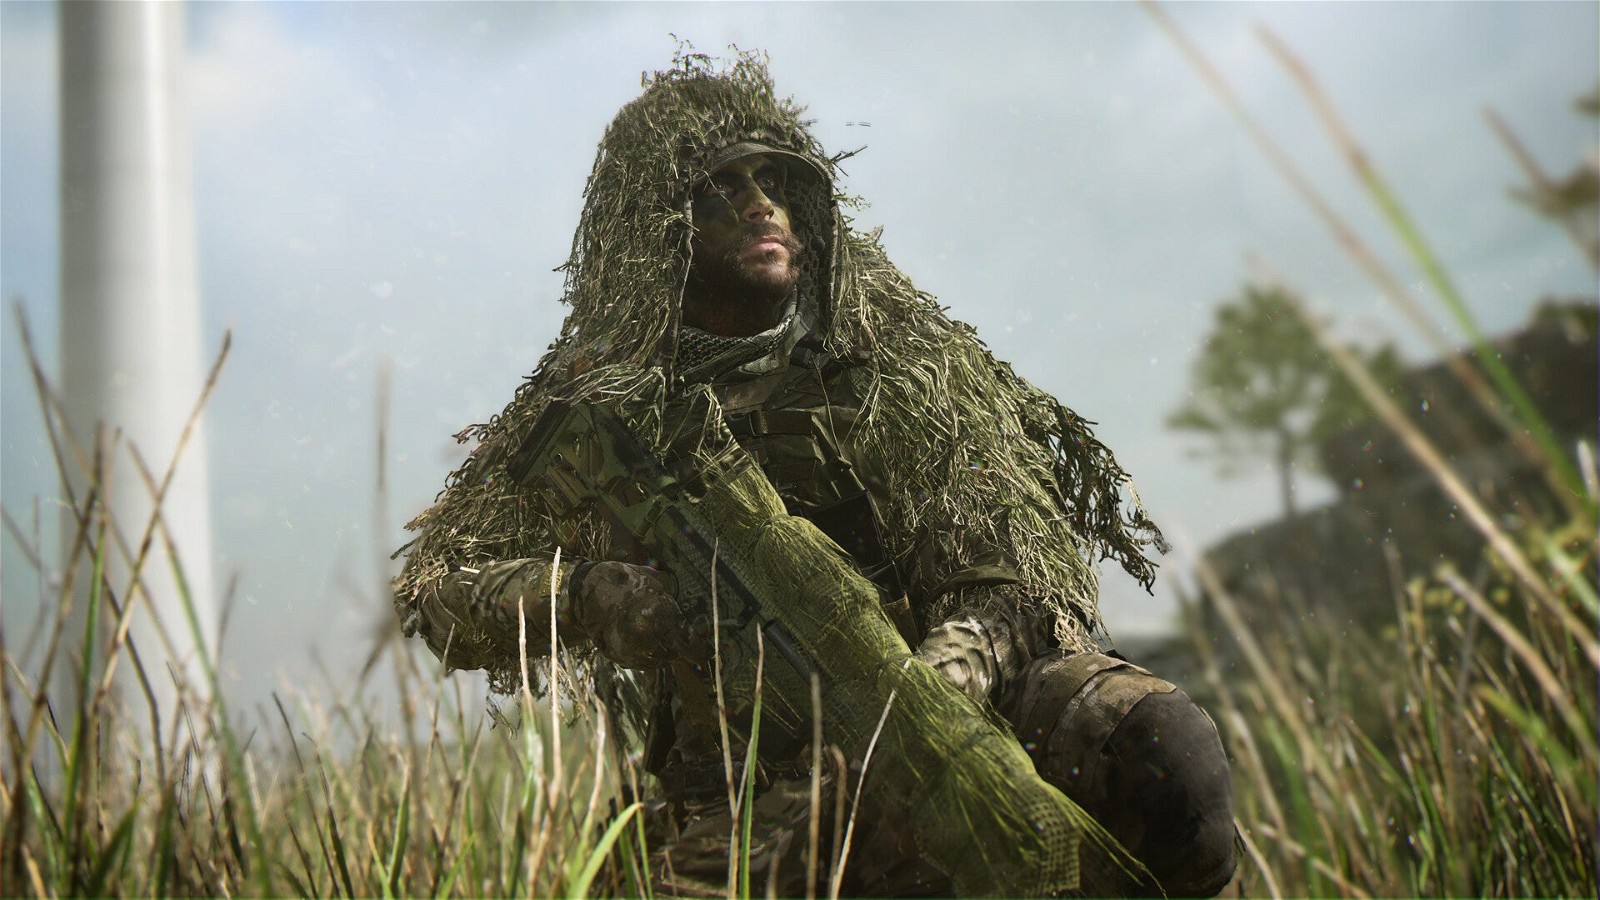 Call of Duty: Modern Warfare 3 Comes out on November 10th